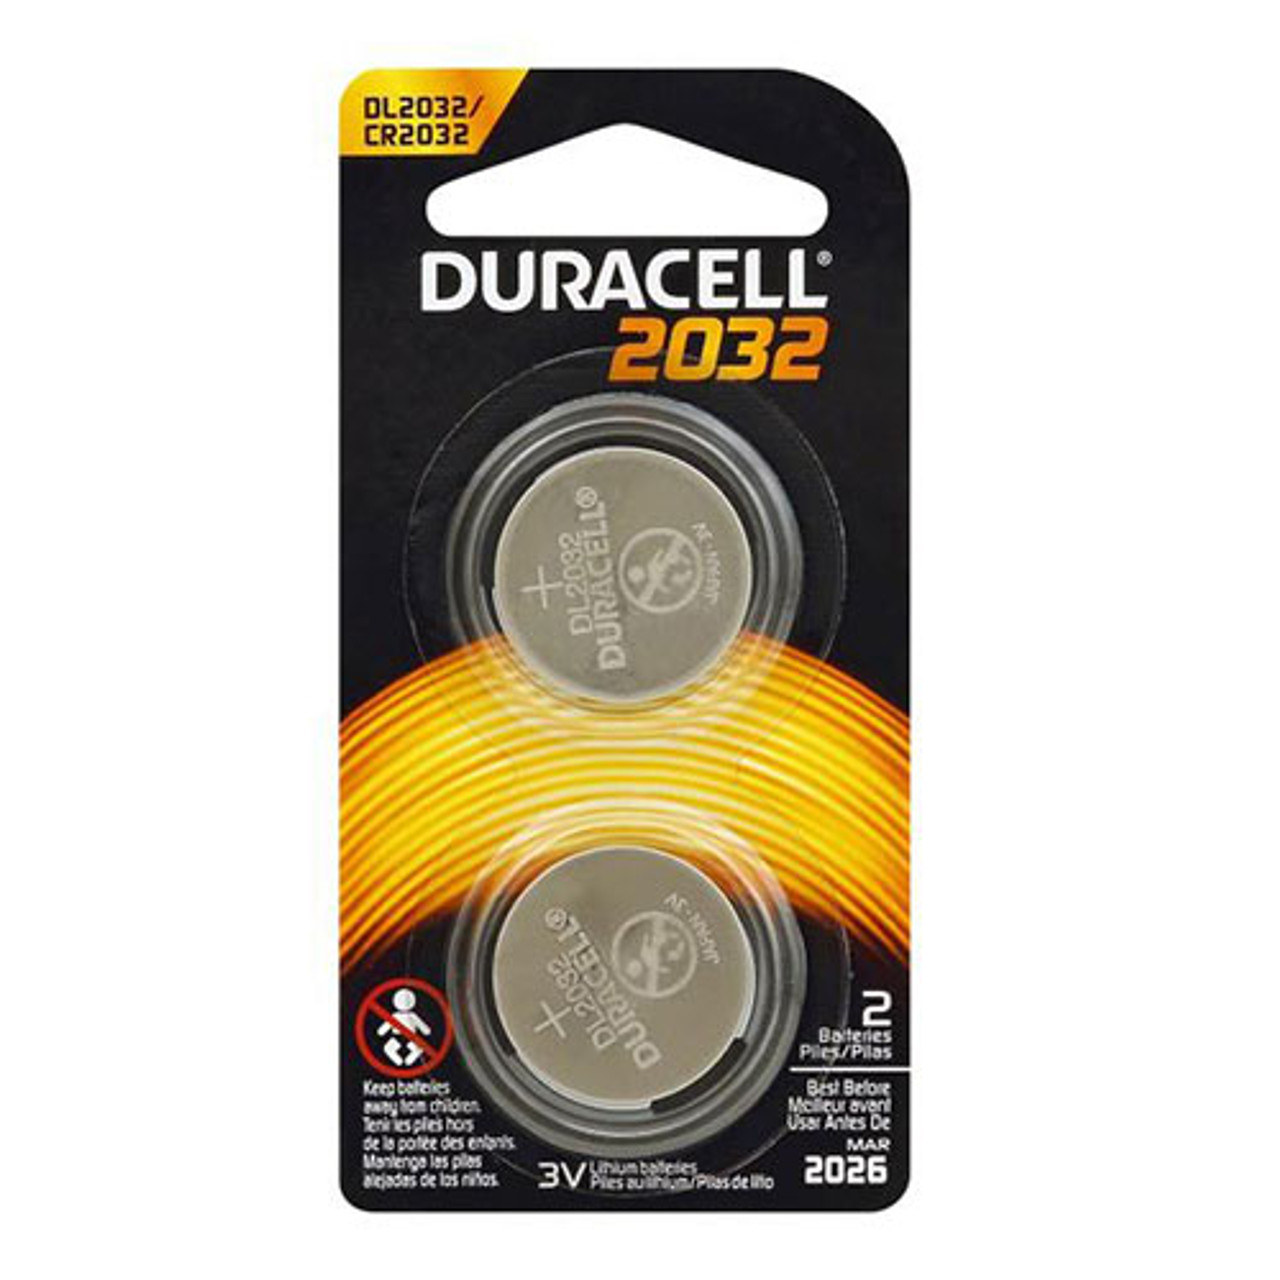 Duracell Cr2032 3V Battery at Rs 15/piece